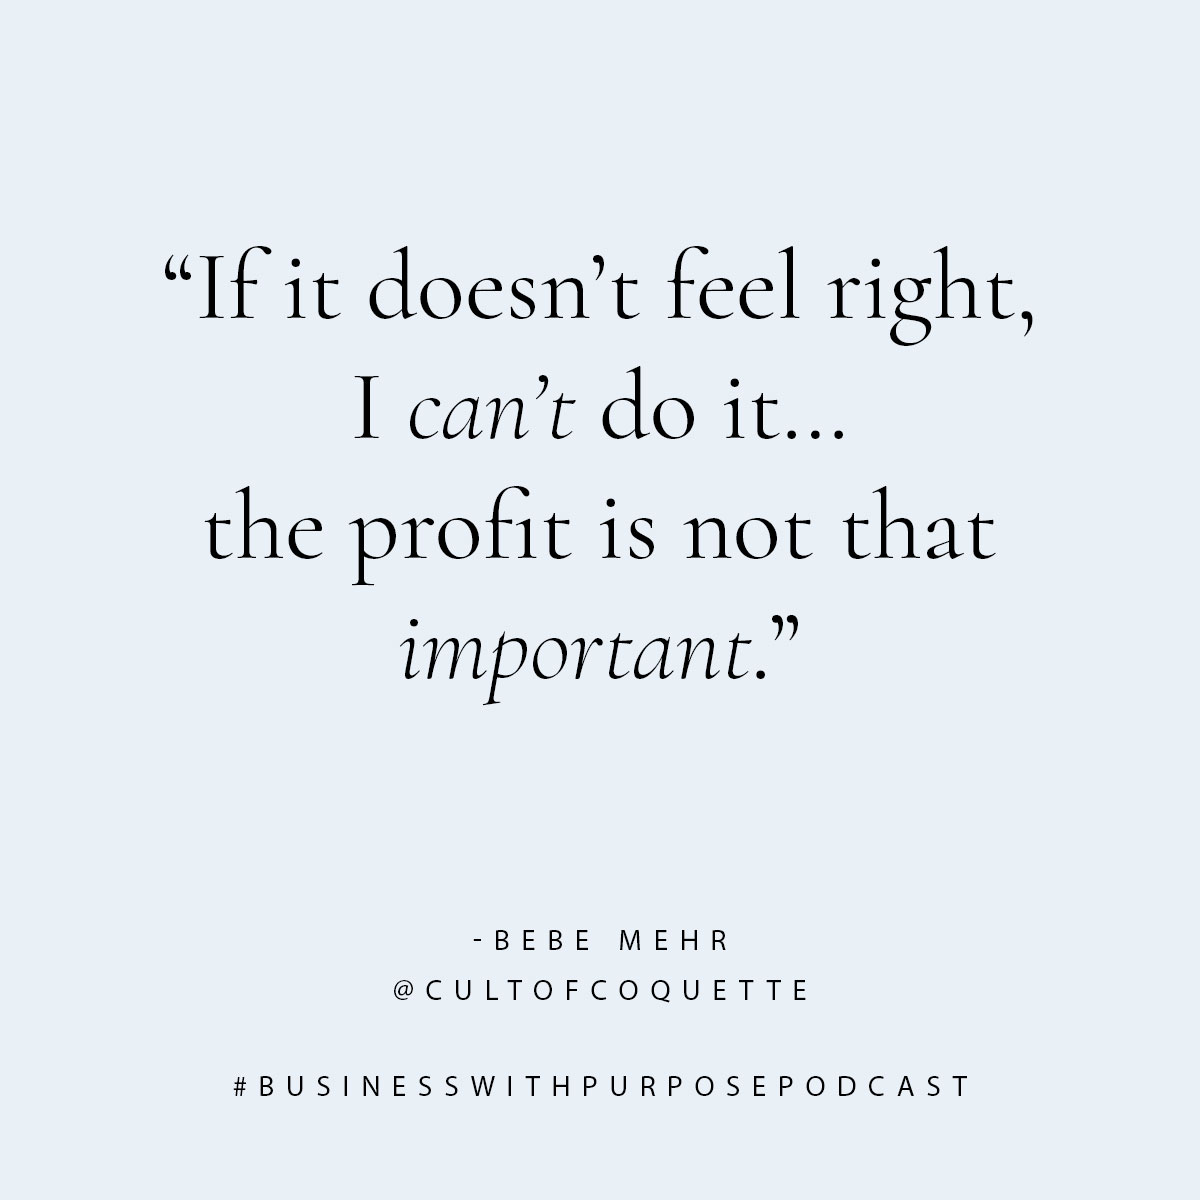 “If it doesn’t feel right, I can’t do it… the profit is not that important.” - Bebe Mehr, Cult of Coquette